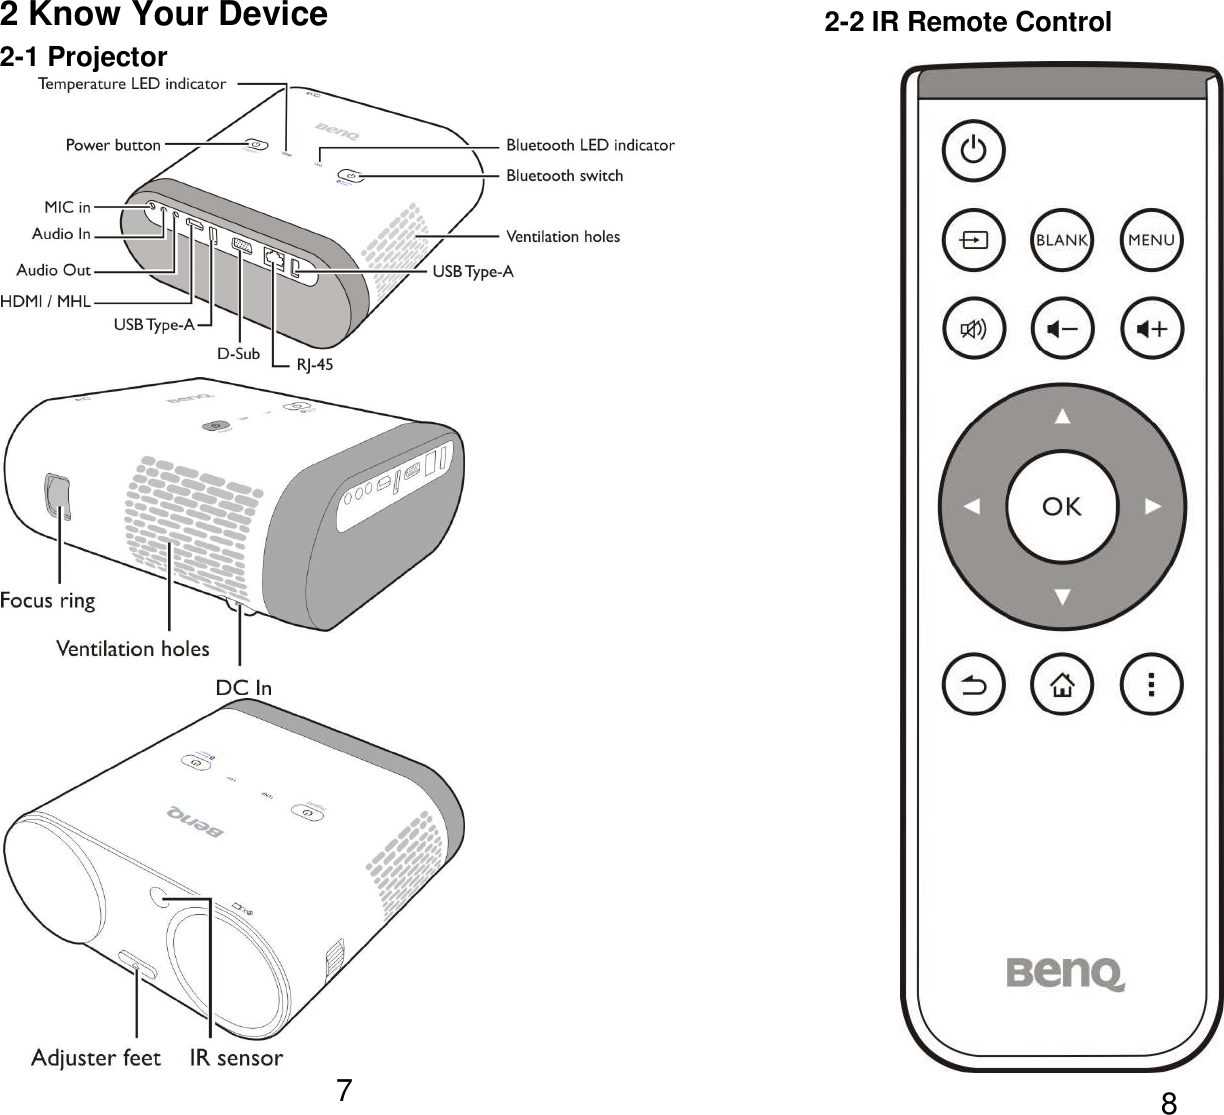   72 Know Your Device2-1 Projector                   82-2 IR Remote Control                          